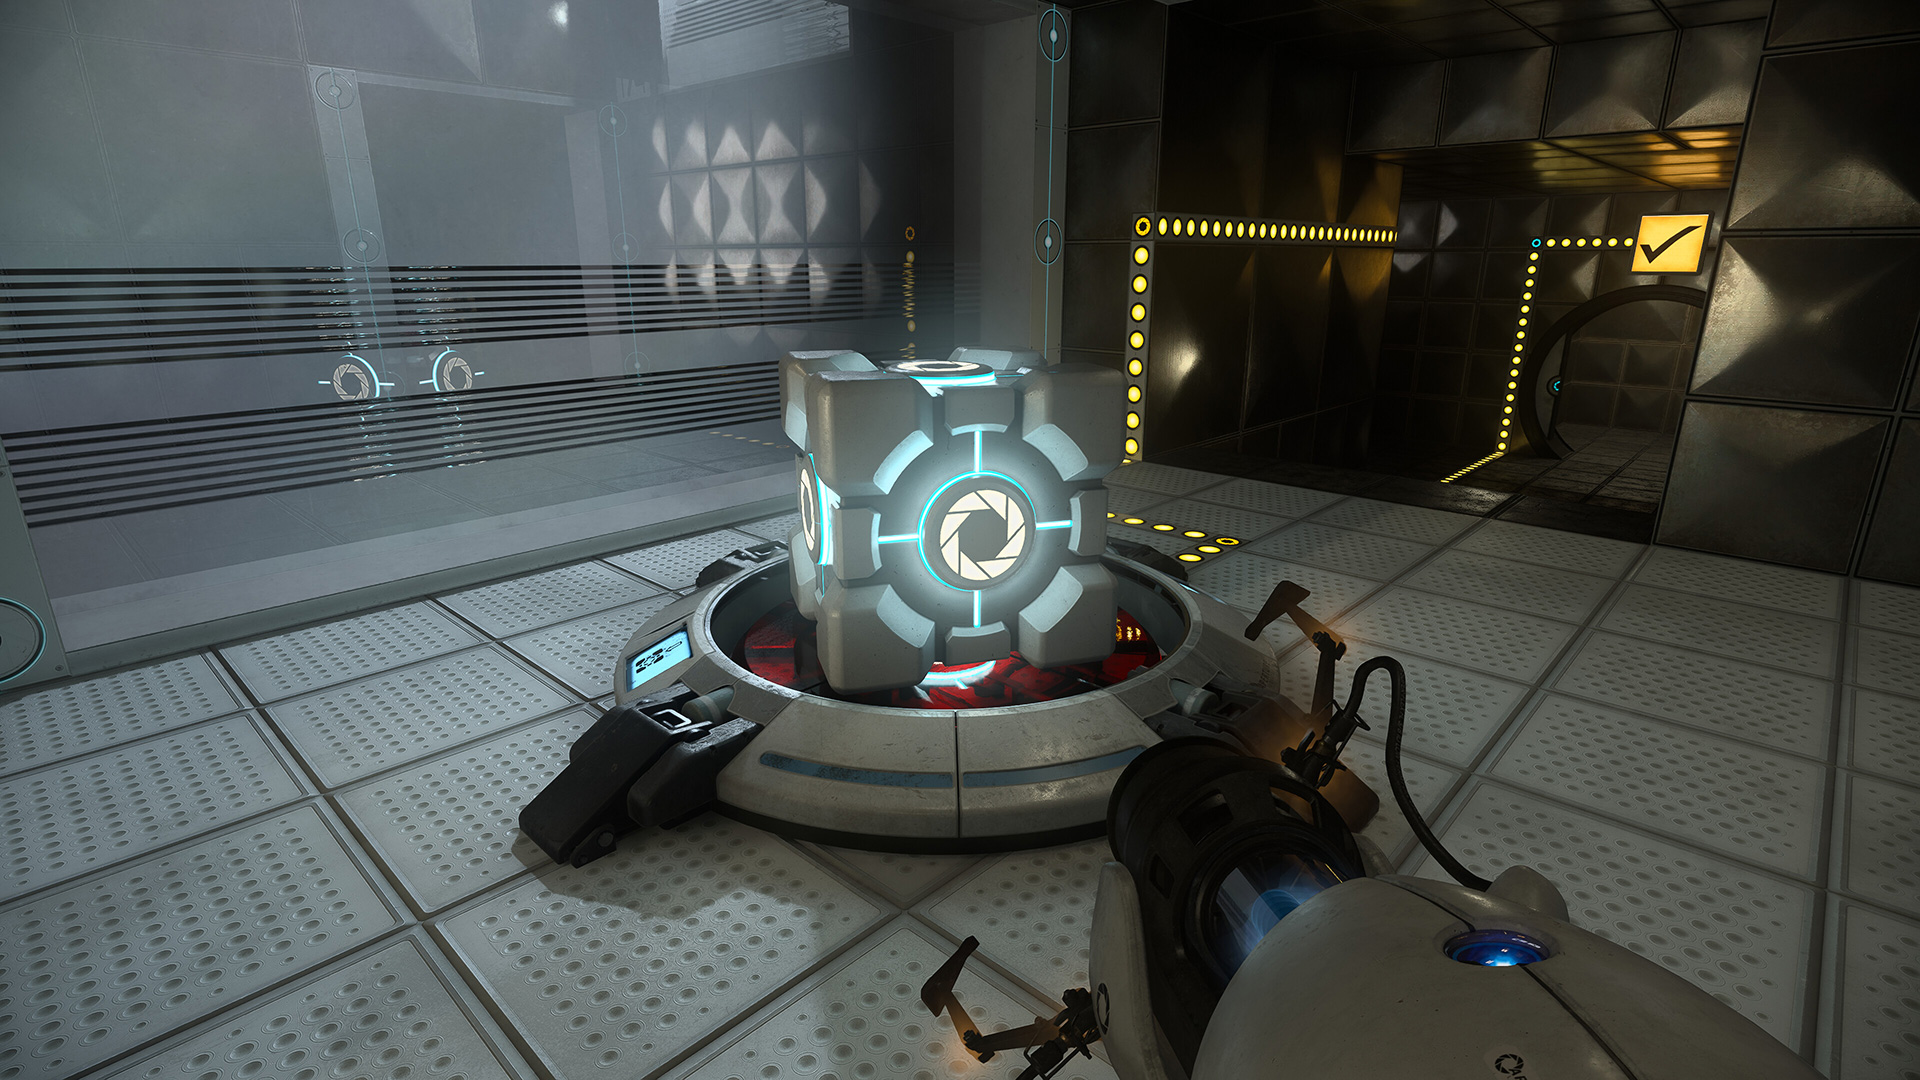 Placing the Companion Cube in Portal with RTX